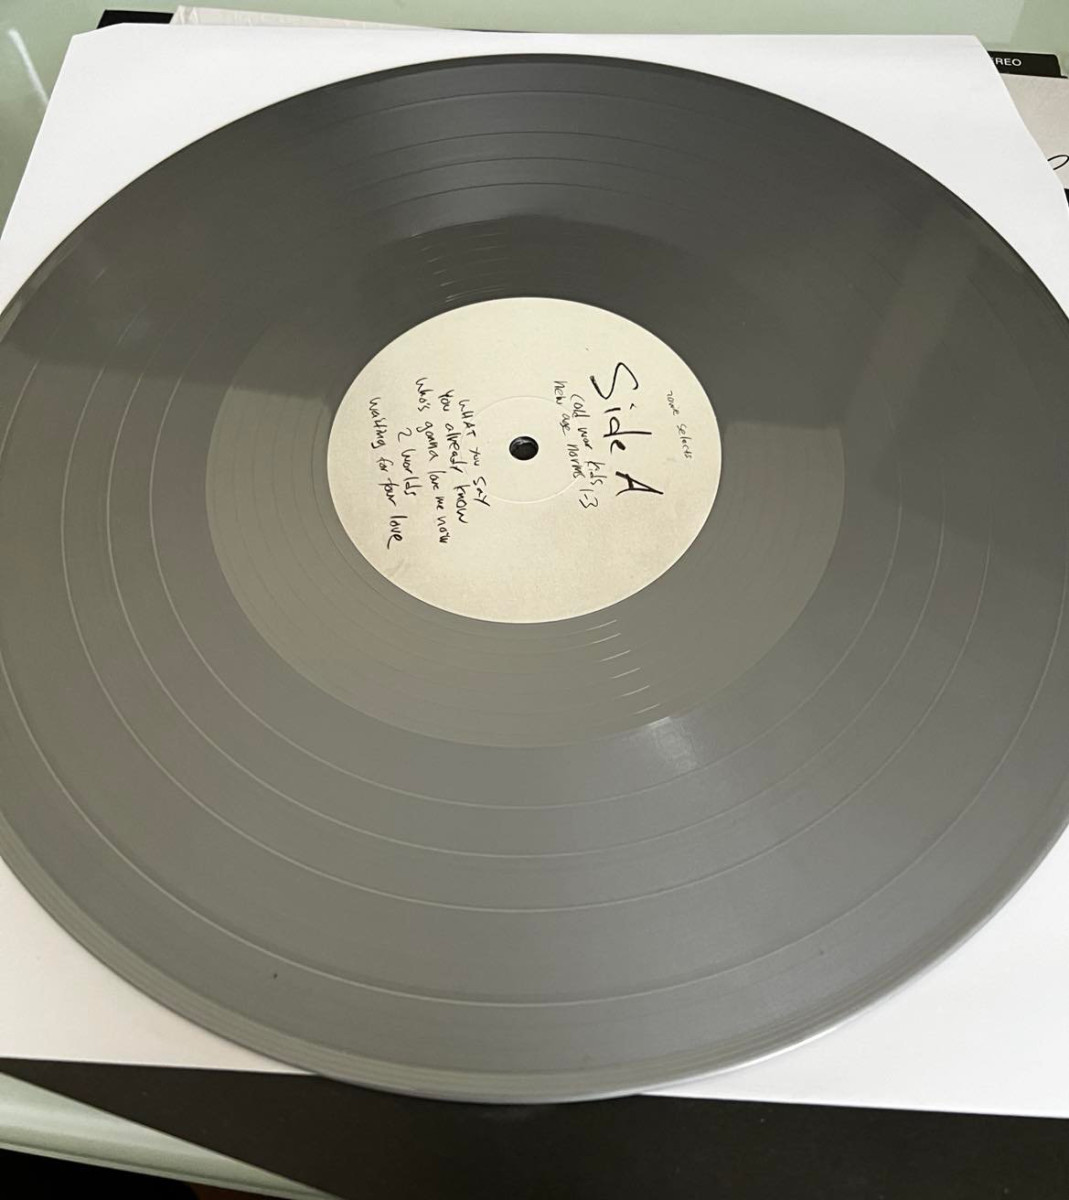 Cold War Kids RSD special release was limited to 500 copiesINLINE